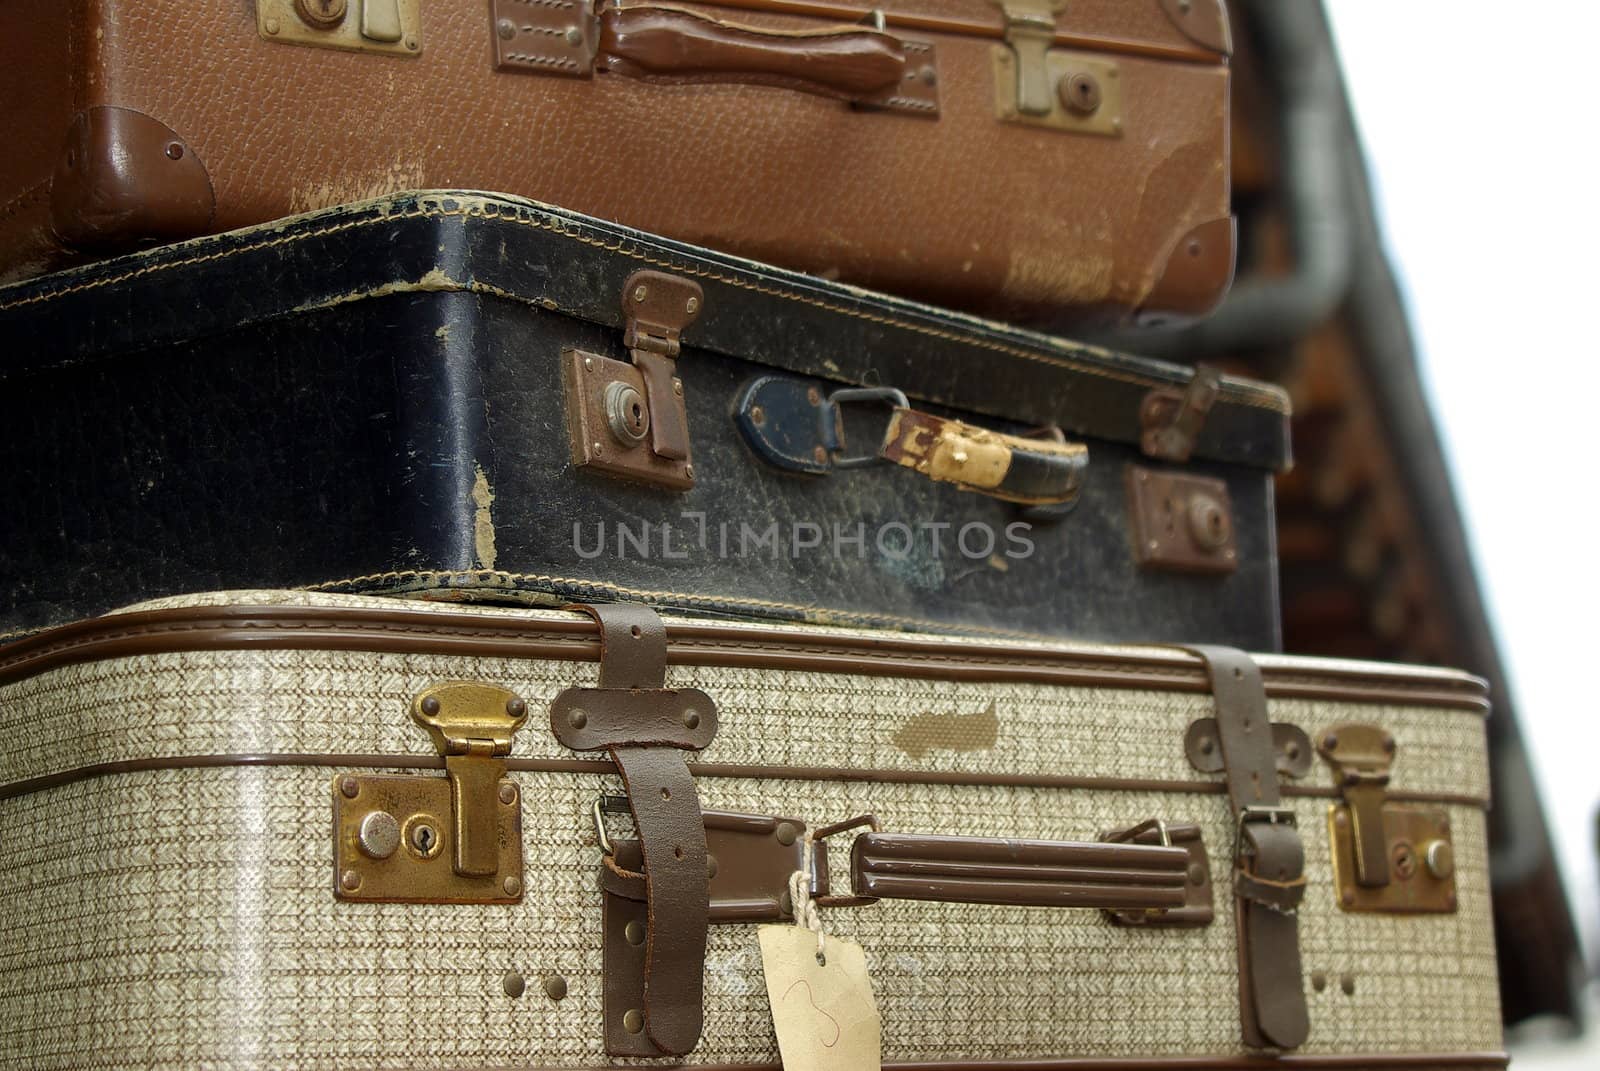  Old Suit-cases by FotoFrank